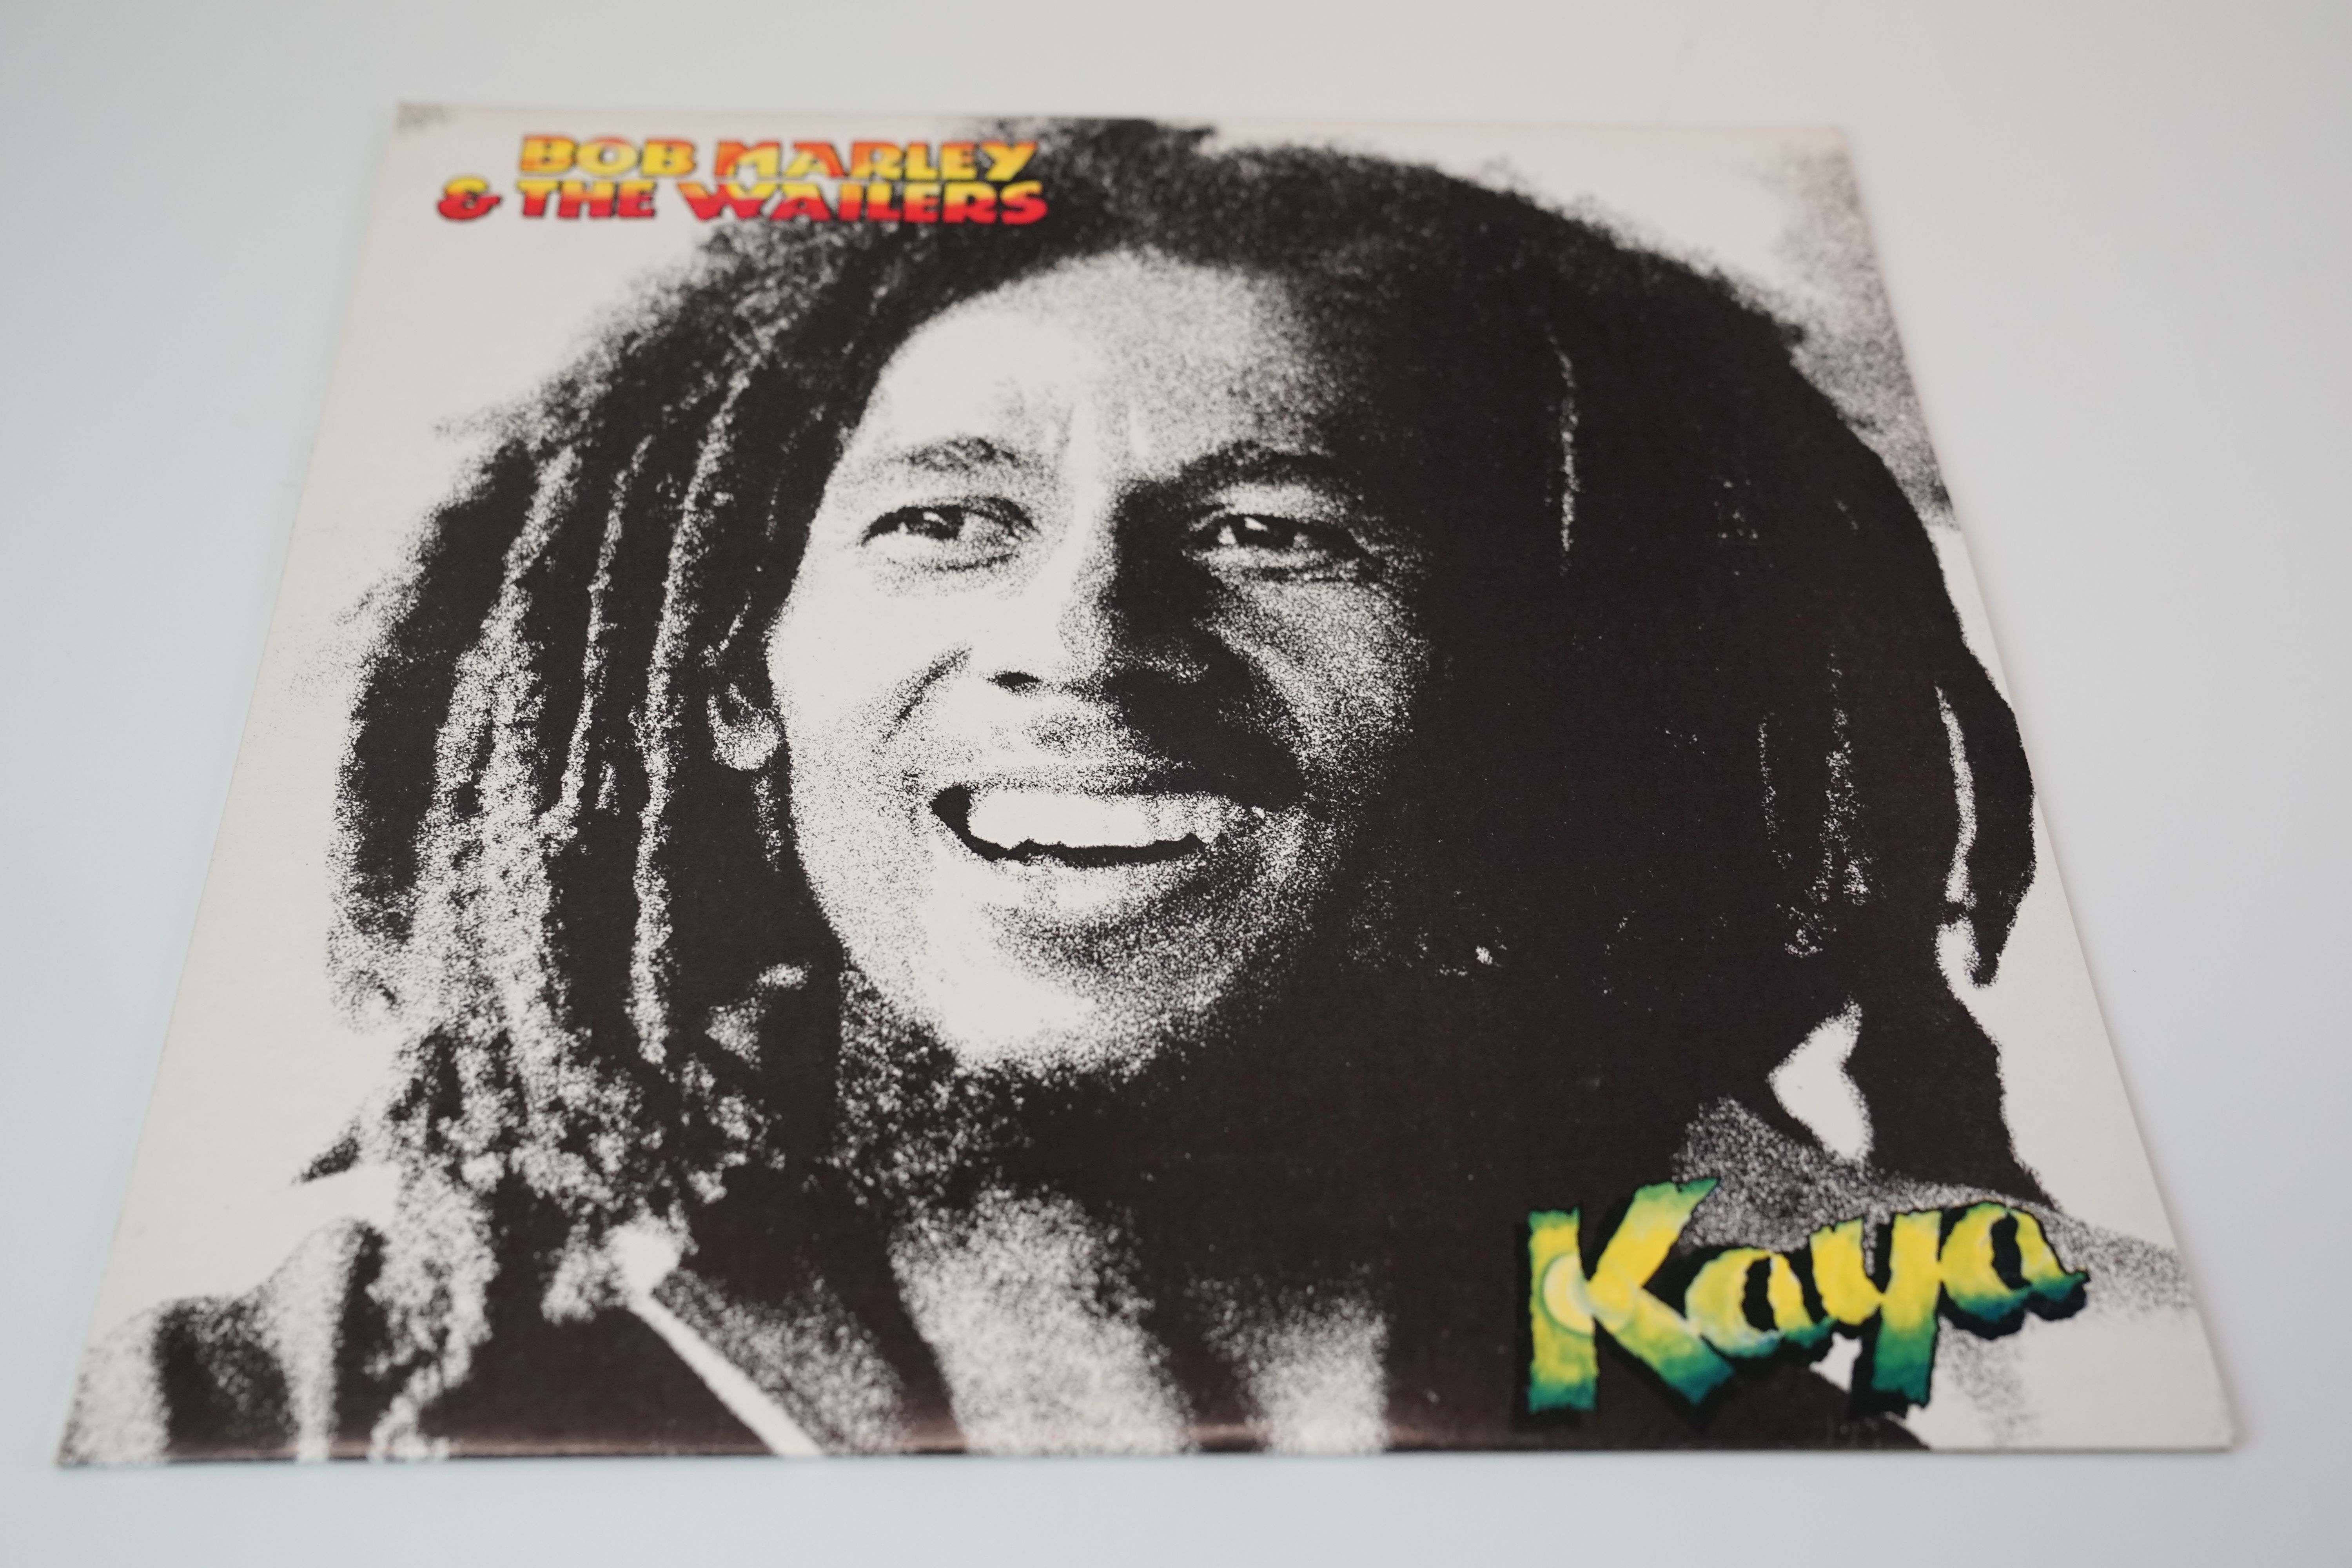 Vinyl - Small collection of 6 Bob Marley LPs to include Uprising, A Friction Herbsman, Natty - Image 14 of 39